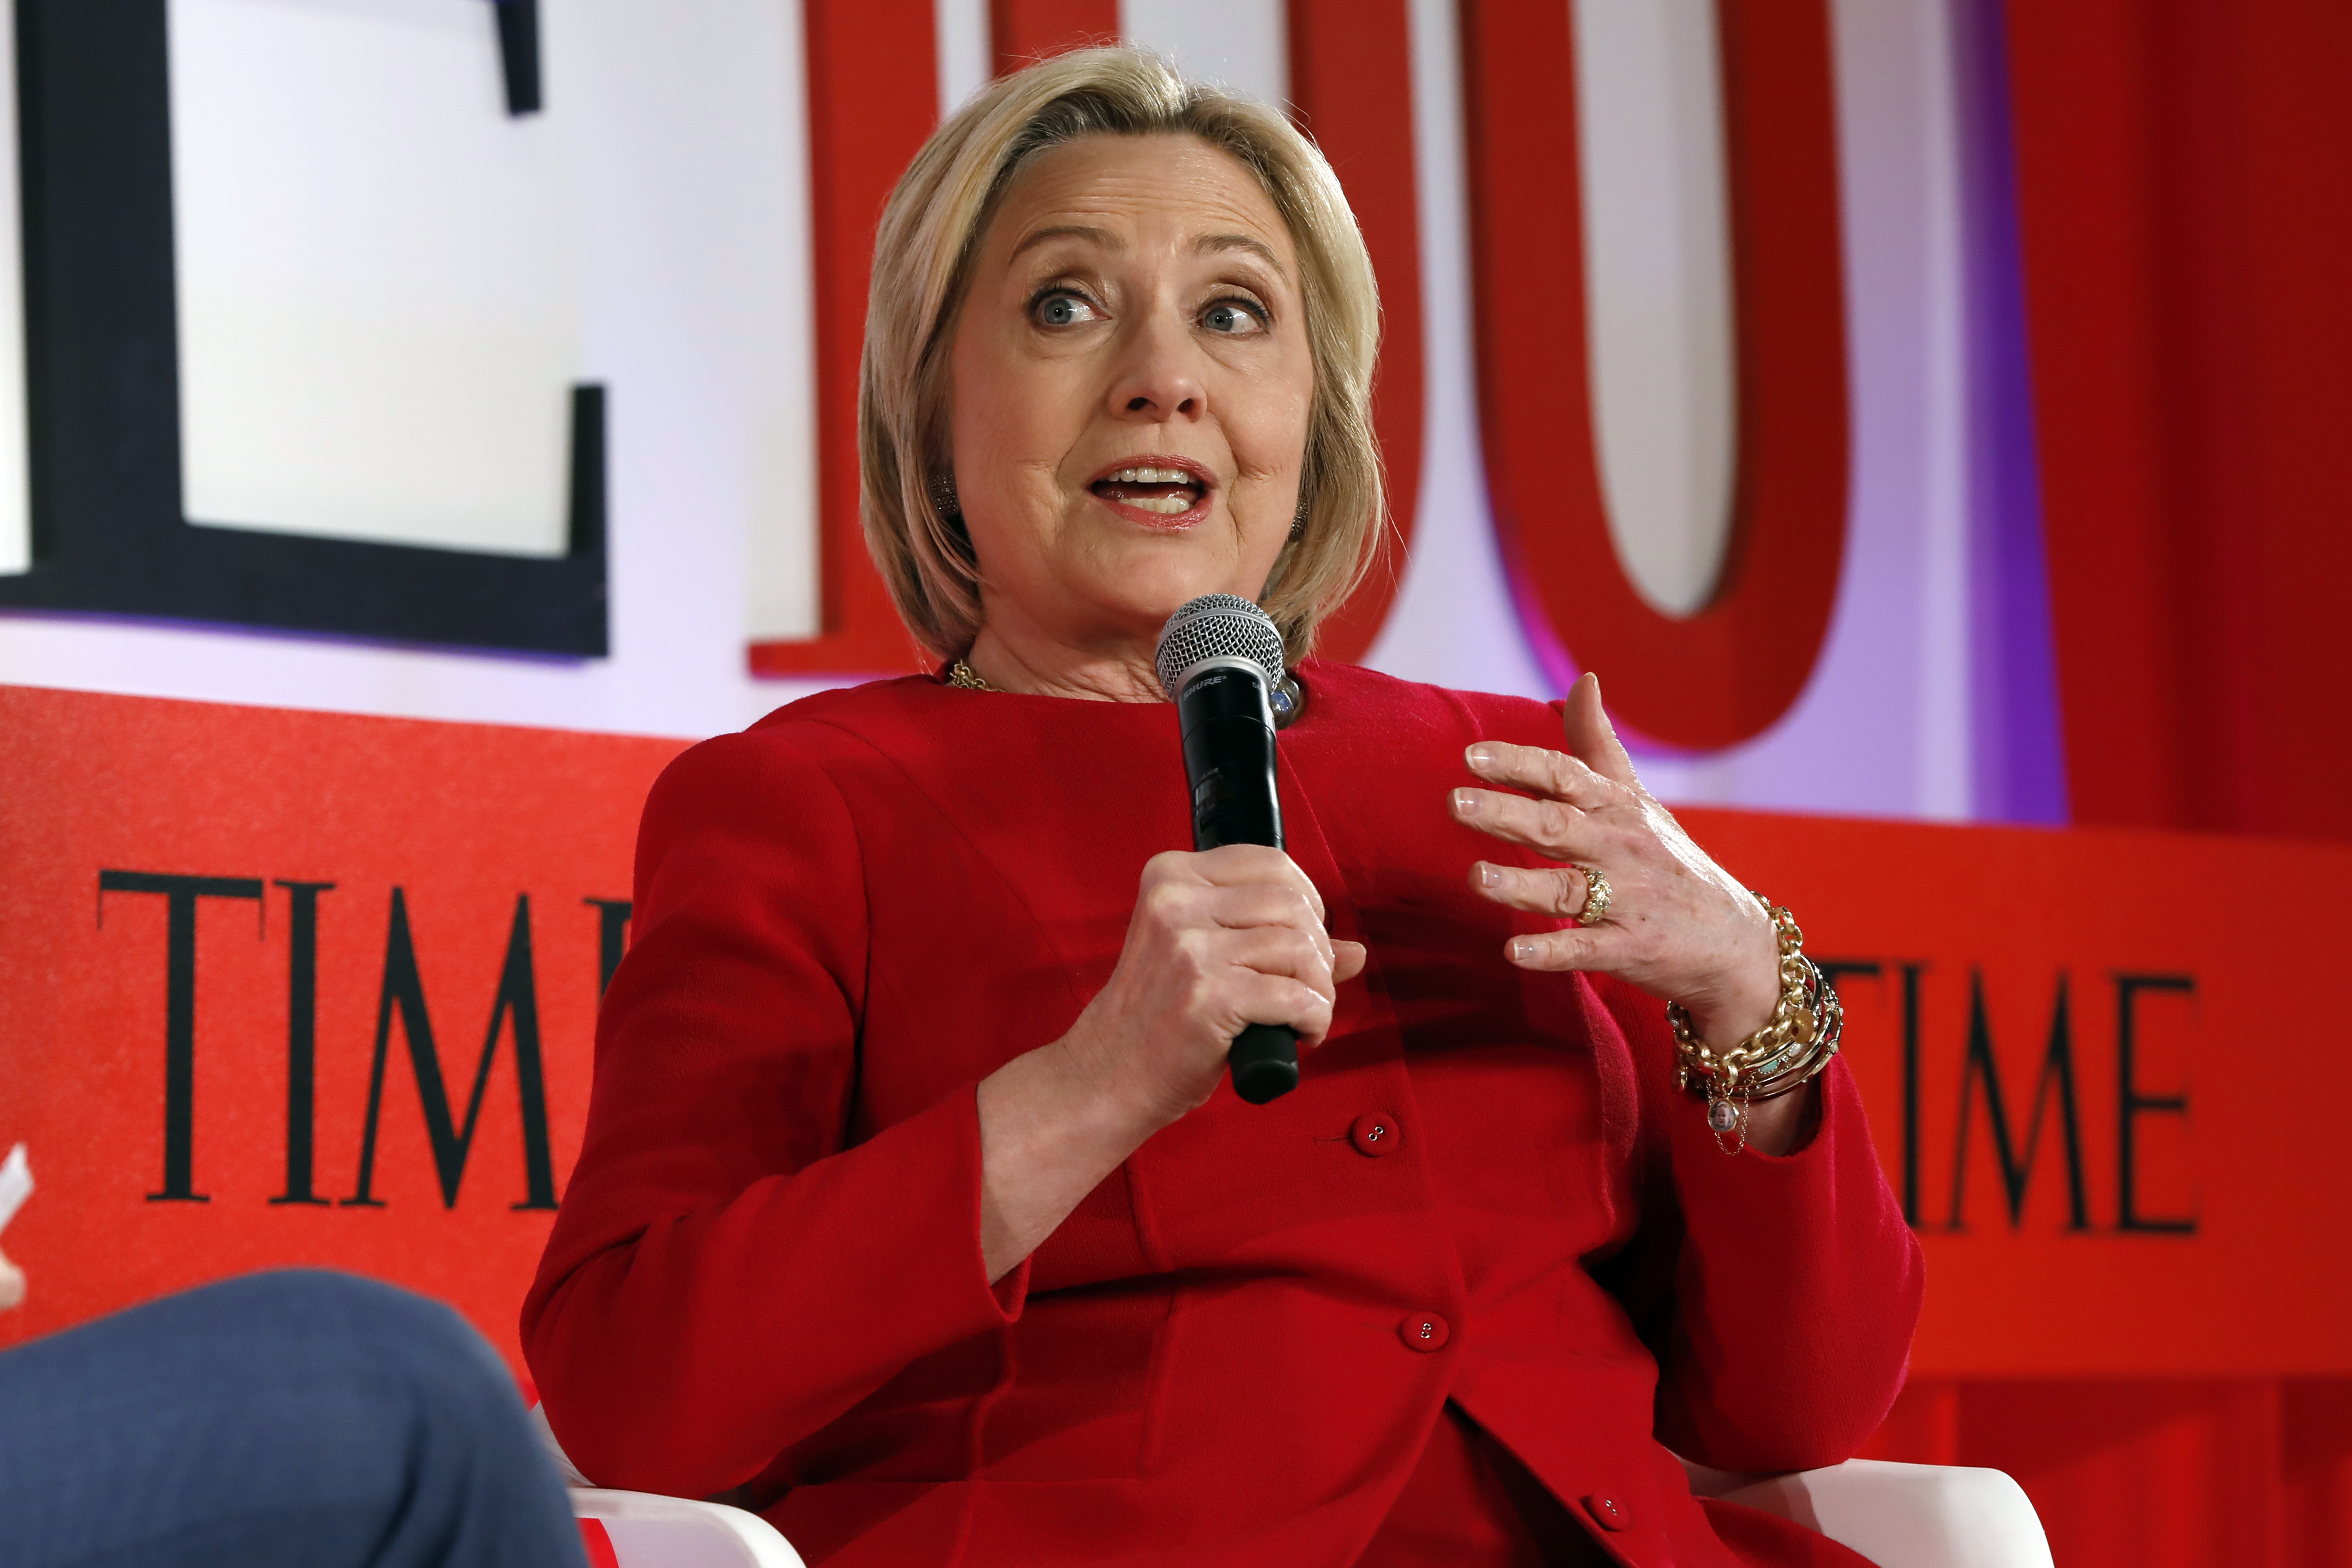 WATCH: Hillary Clinton Defends Israel on MSNBC | SOURCE: VINnews